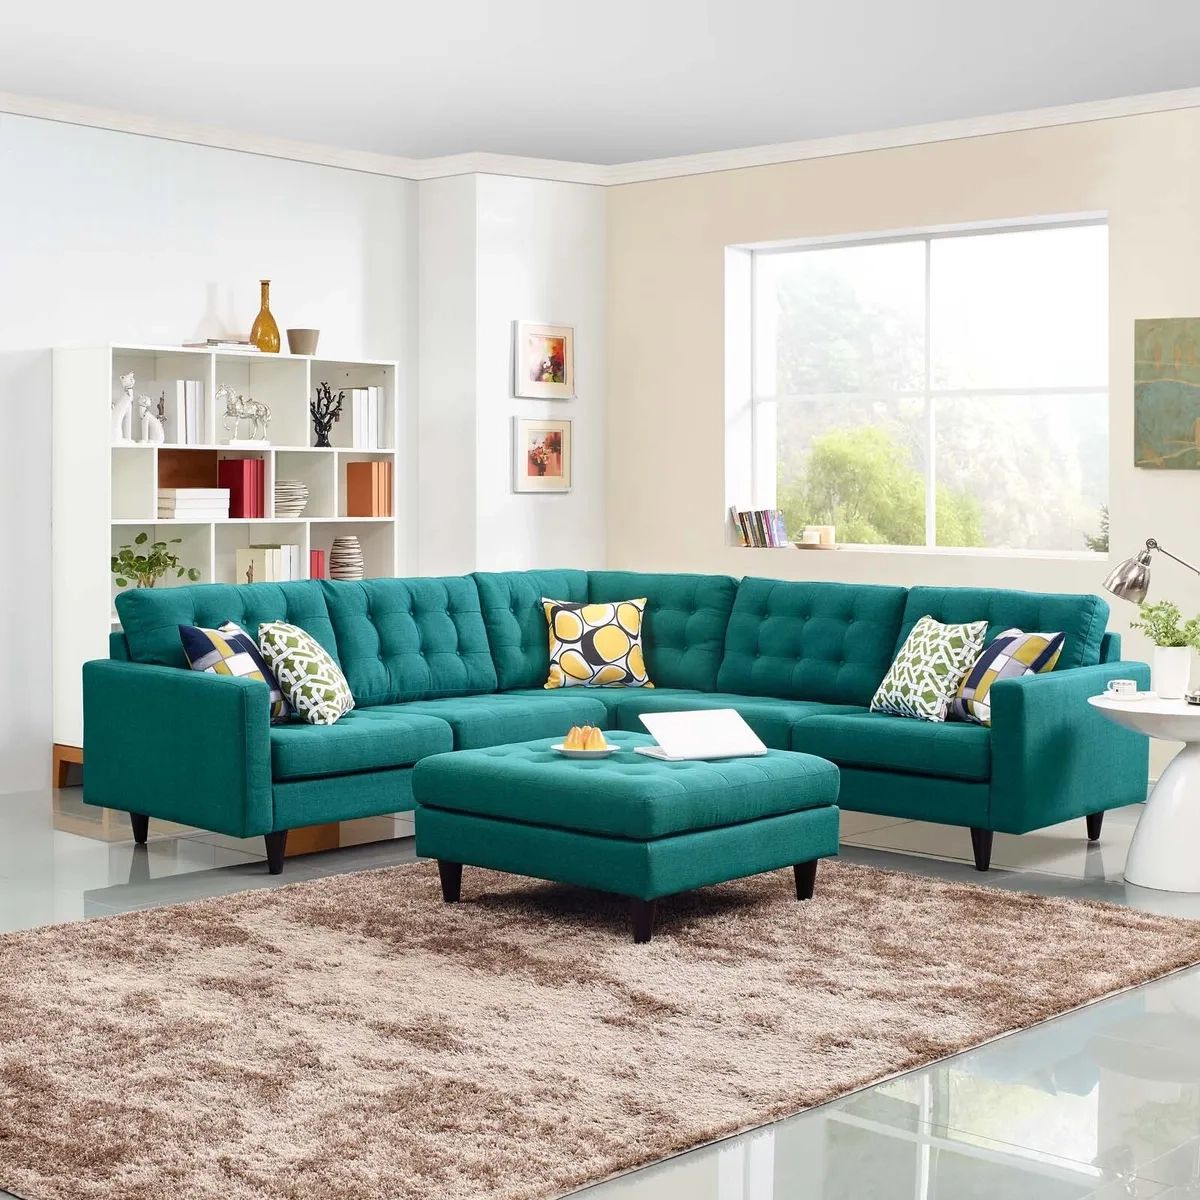 Modway Mid Century Modern Tufted Fabric Upholstered Sectional Sofa Set In  Teal | Ebay Regarding Tufted Upholstered Sofas (Photo 13 of 15)